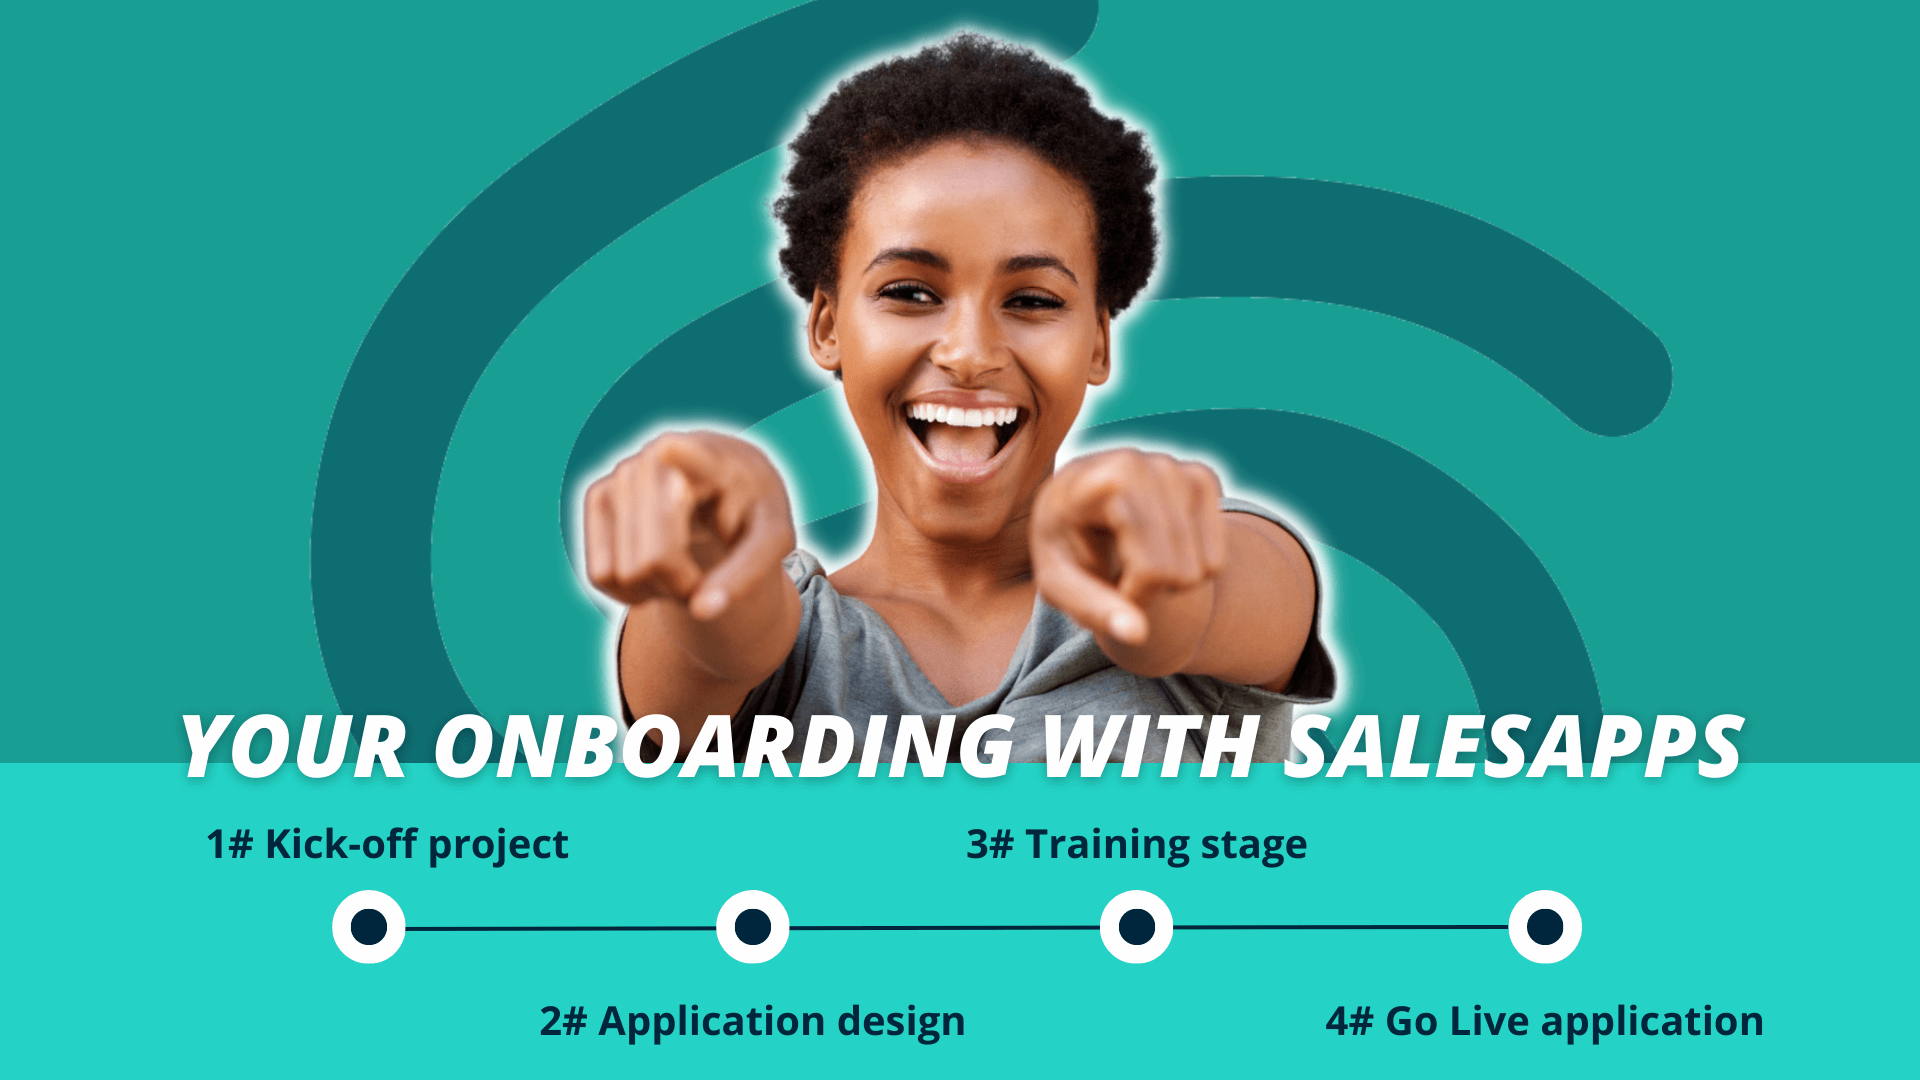 Steps to customer onboarding with Salesapps